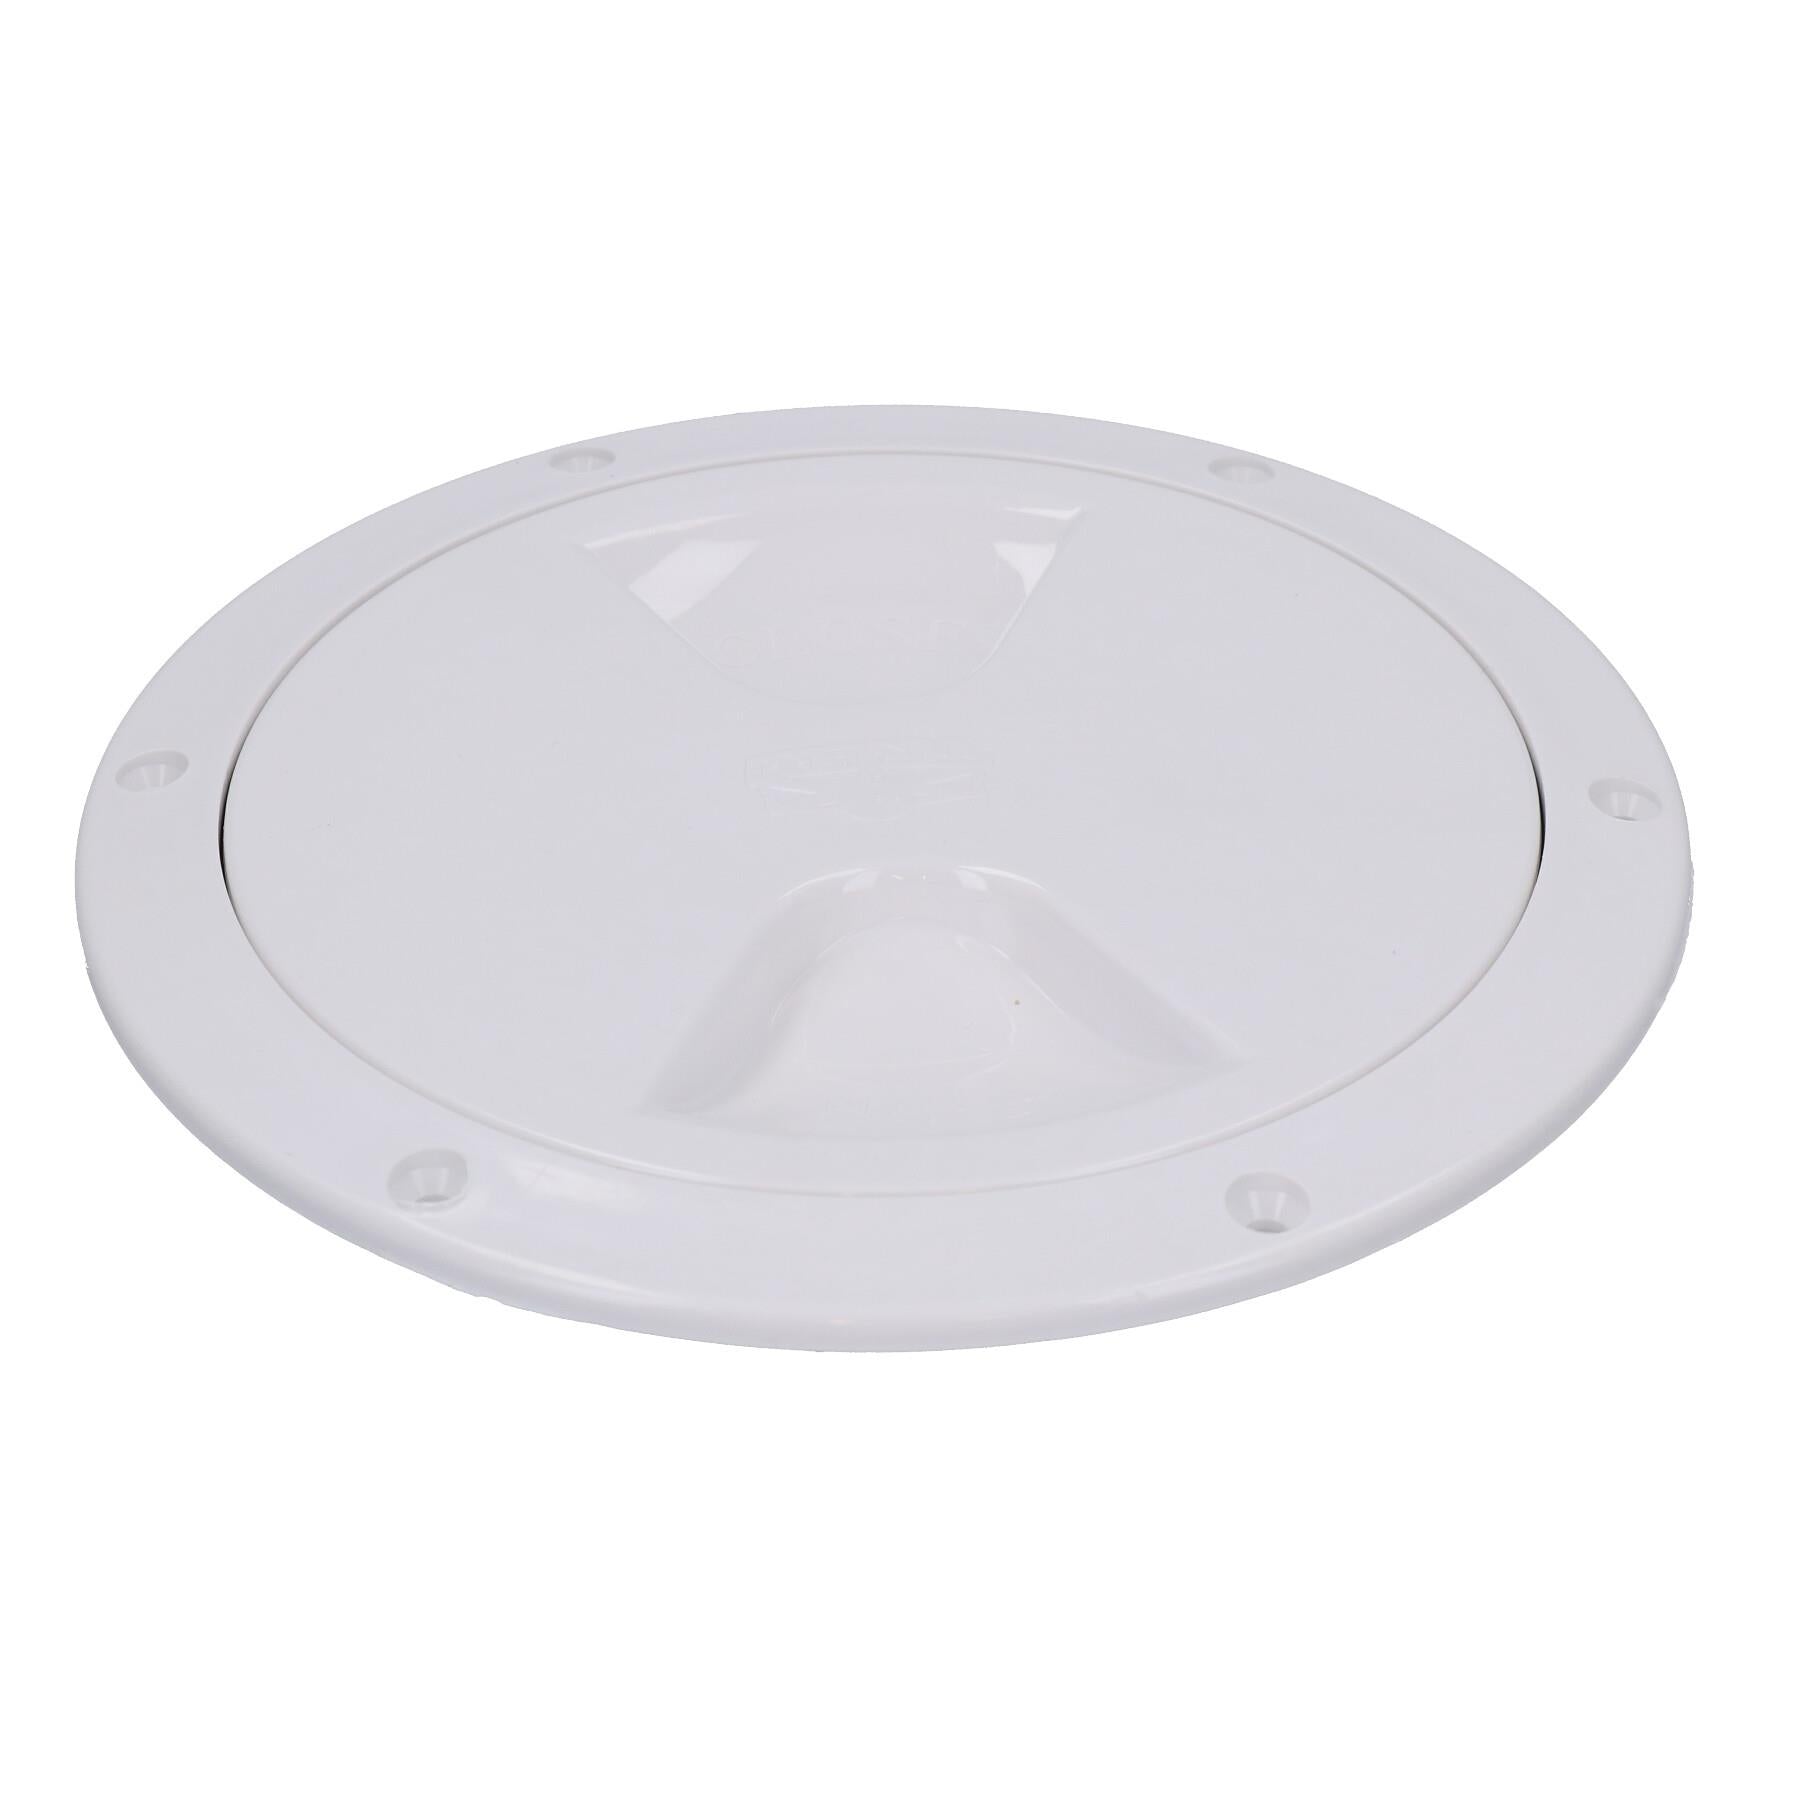 170mm Round Inspection Hatch Waterproof Cover IPX6 White 140mm Cut Out